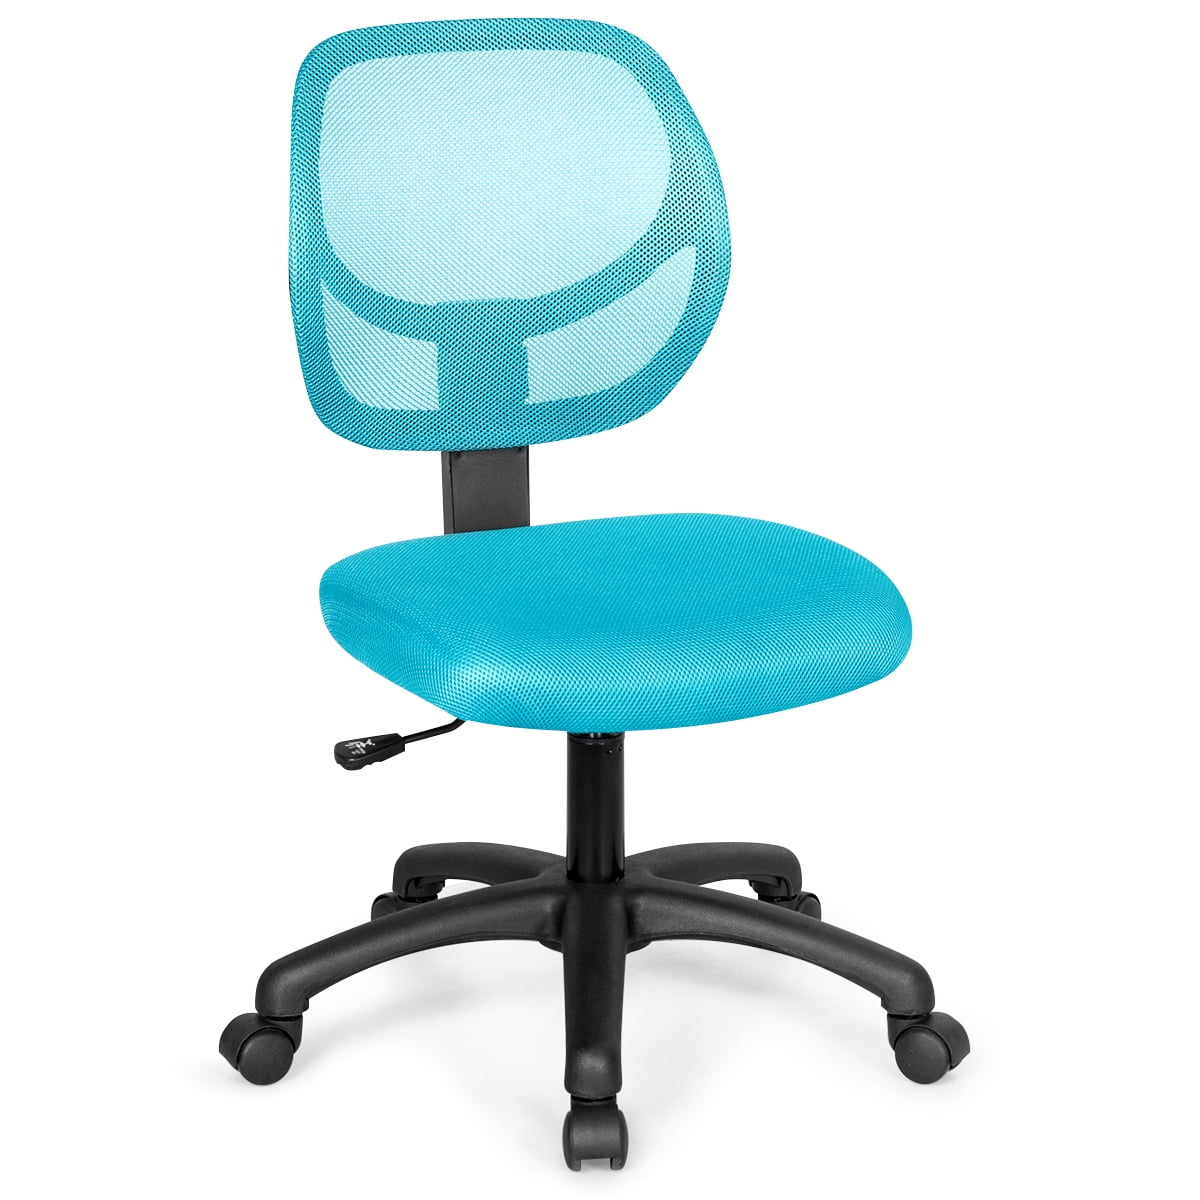 Costway Mesh Office Chair Low Back, Turquoise Armless Task Chair